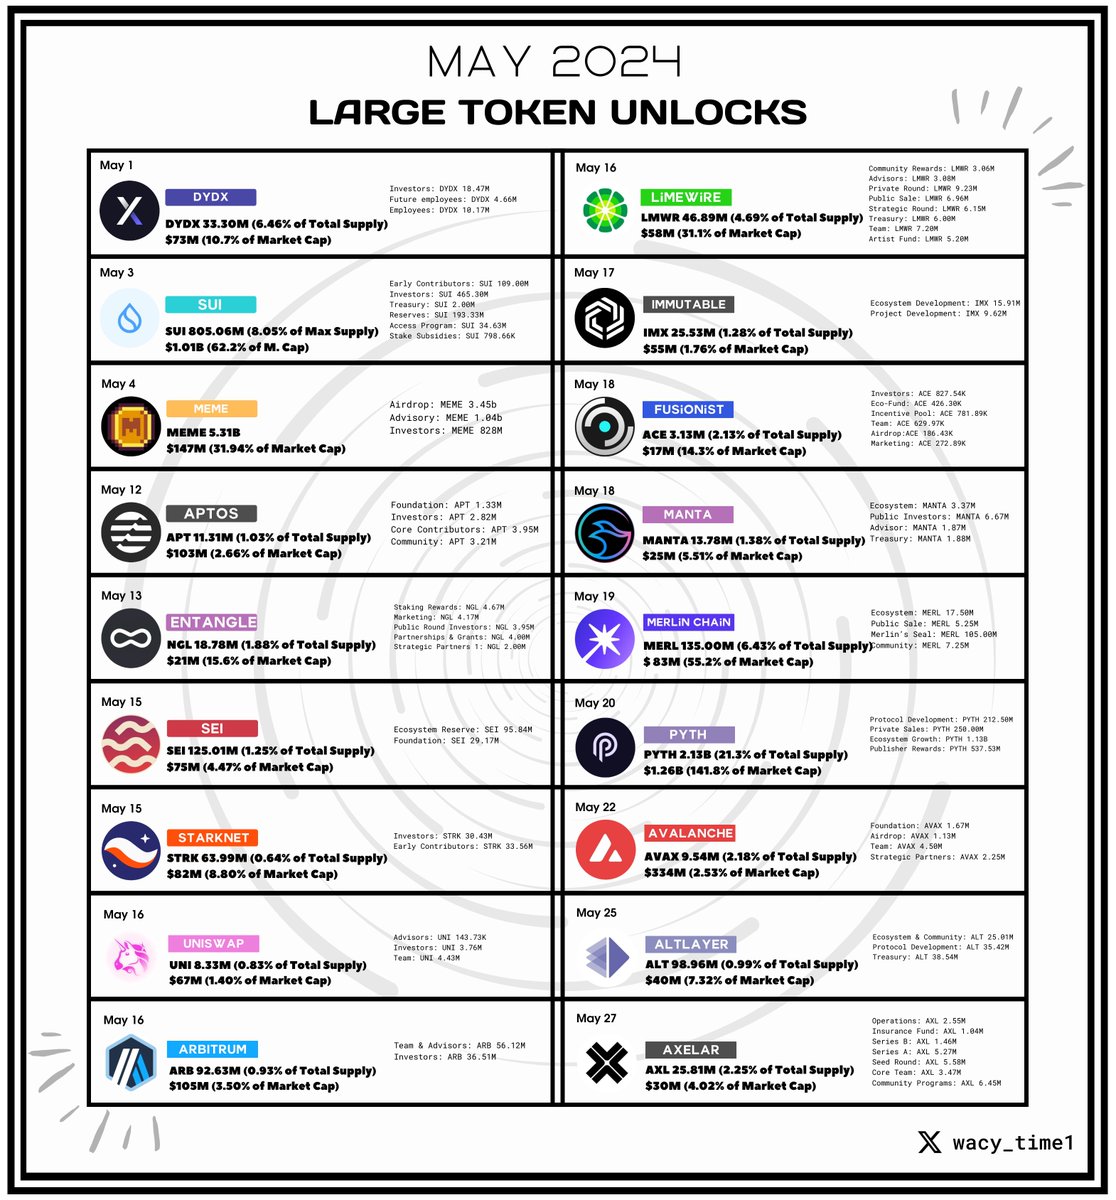 Large token unlocks in May 🧵: The largest: • $PYTH - $1.26B May 20 • $SUI - $1.01B May 3 • $AVAX - $334M May 22 • $MEME - $147M May 3 Others: • $DYDX - $73M May 1 • $APT - $103M May 12 • $NGL - $21M May 13 • $SEI - $75M May 15 • $STRK - $82M May 15 • $UNI - $67M May…